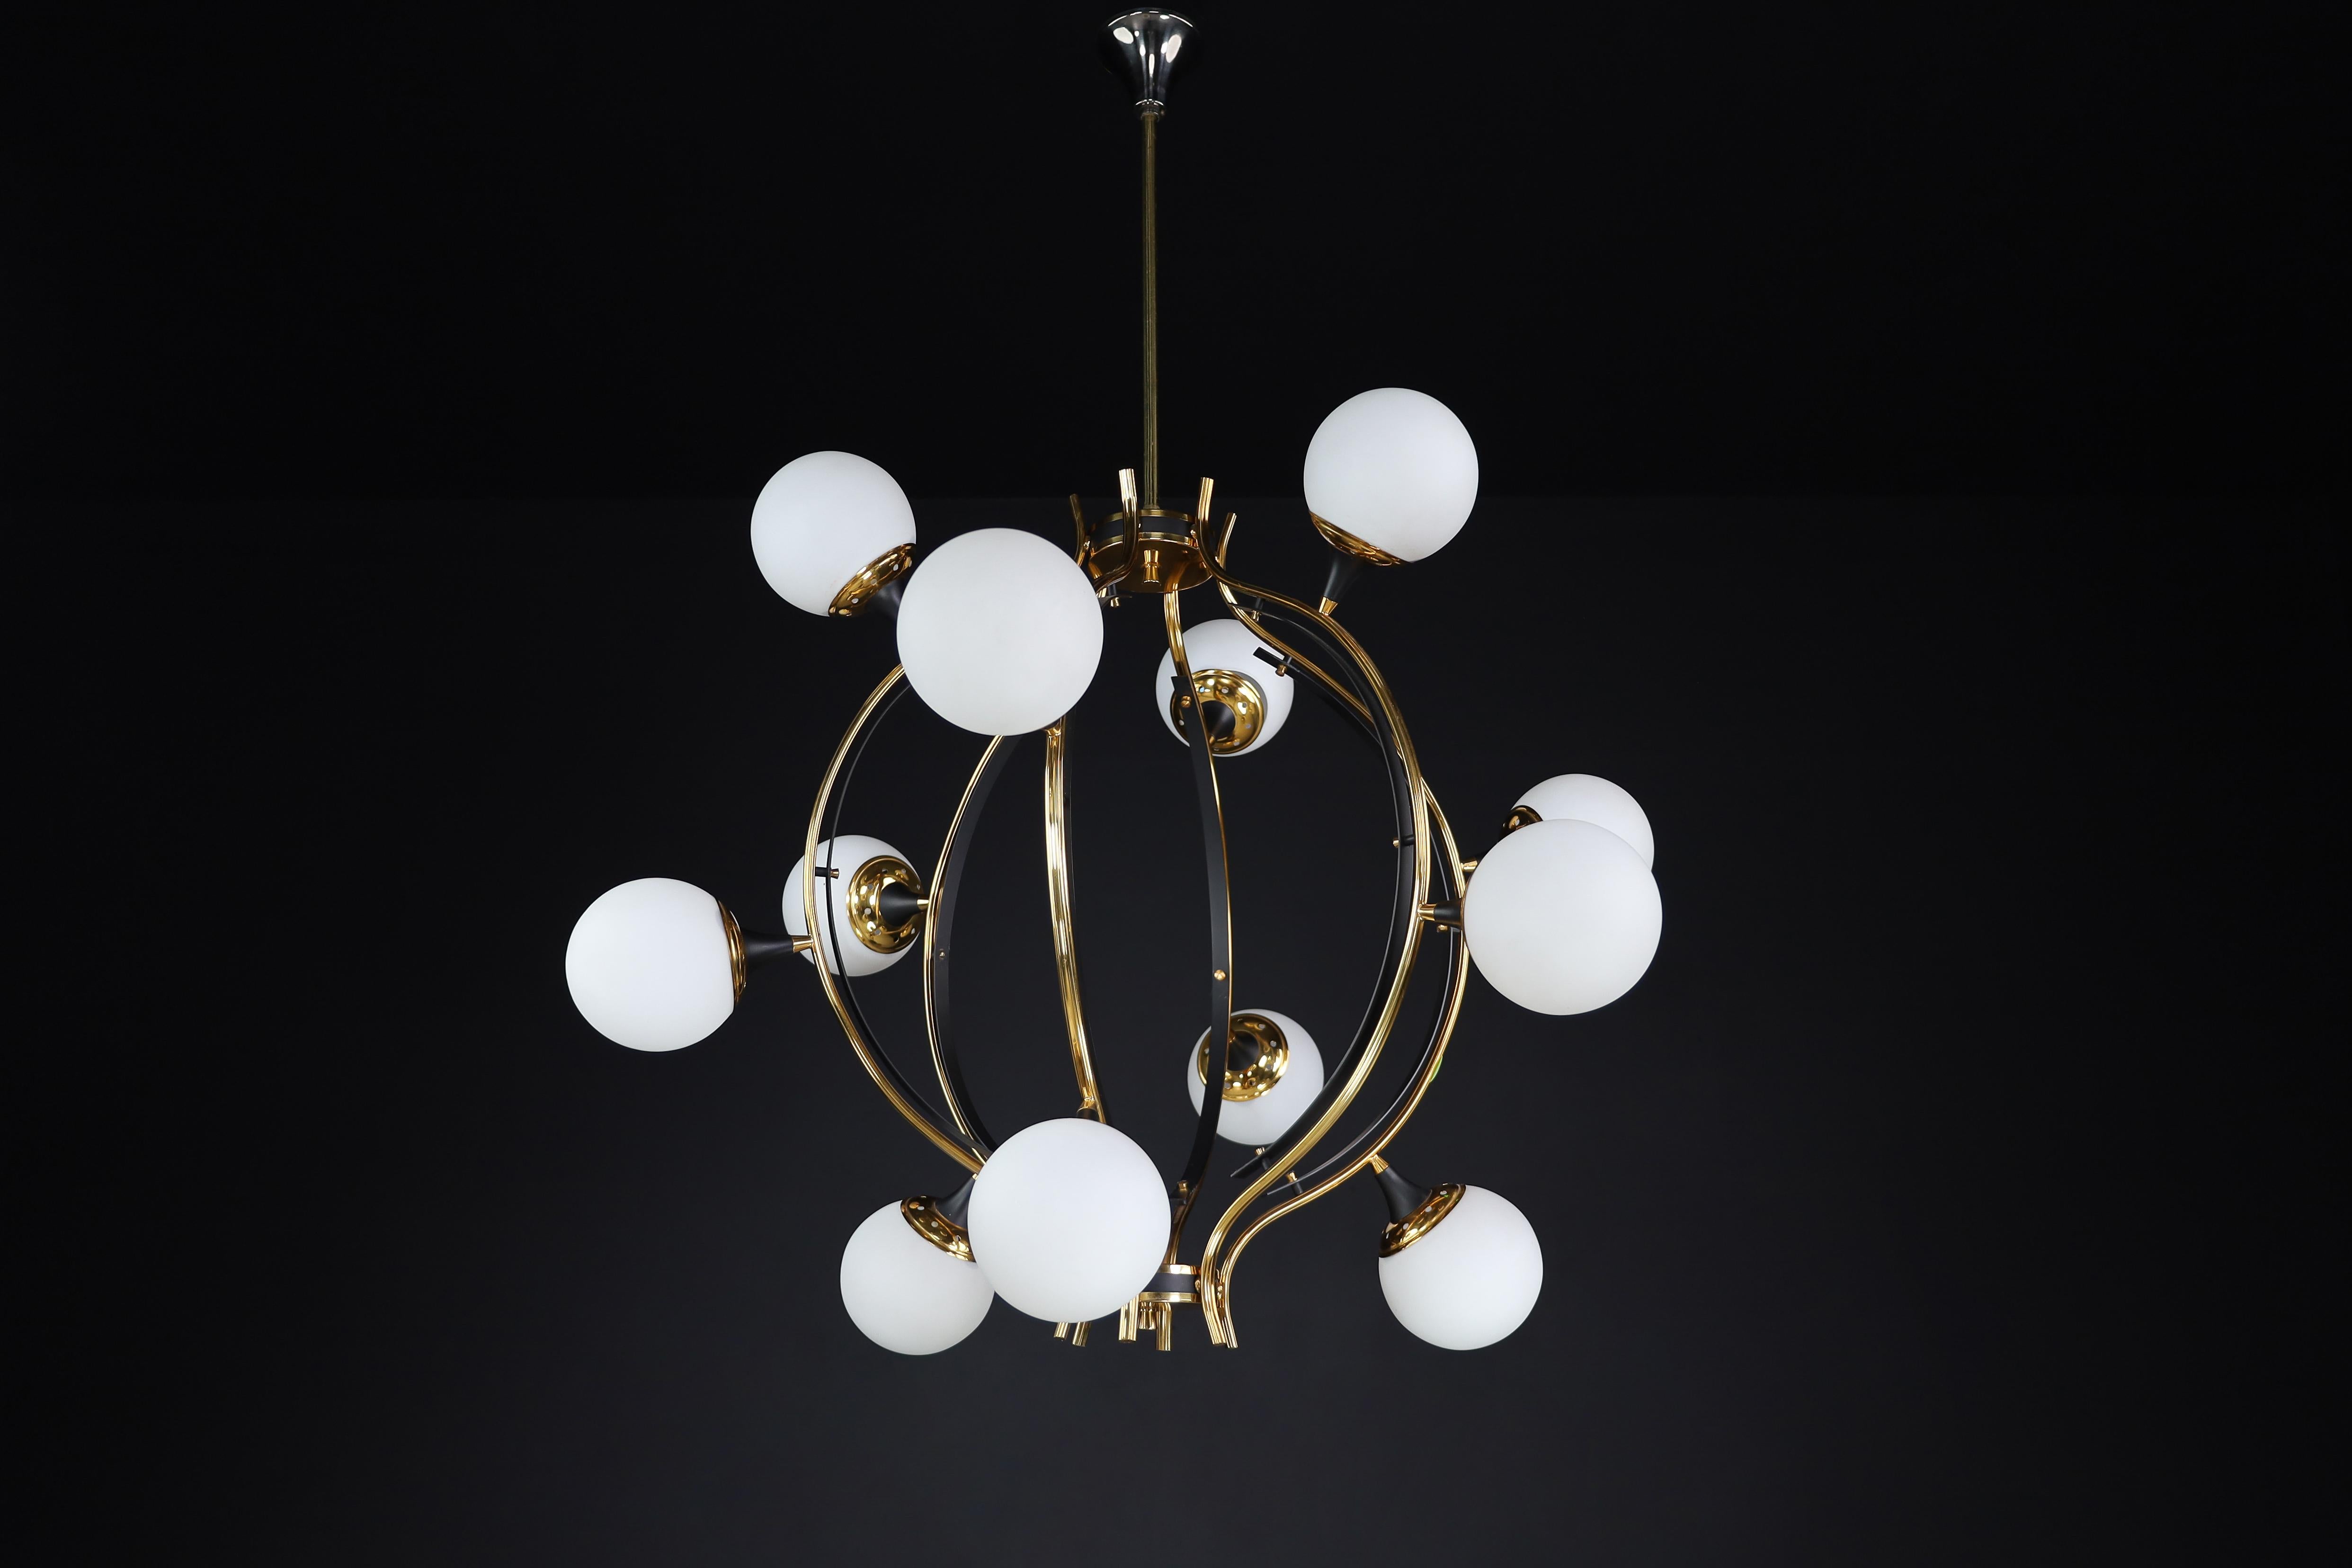 Midcentury Stilnovo Chandelier in Brass and 12 Opaline Globes, Italy 1950s For Sale 1